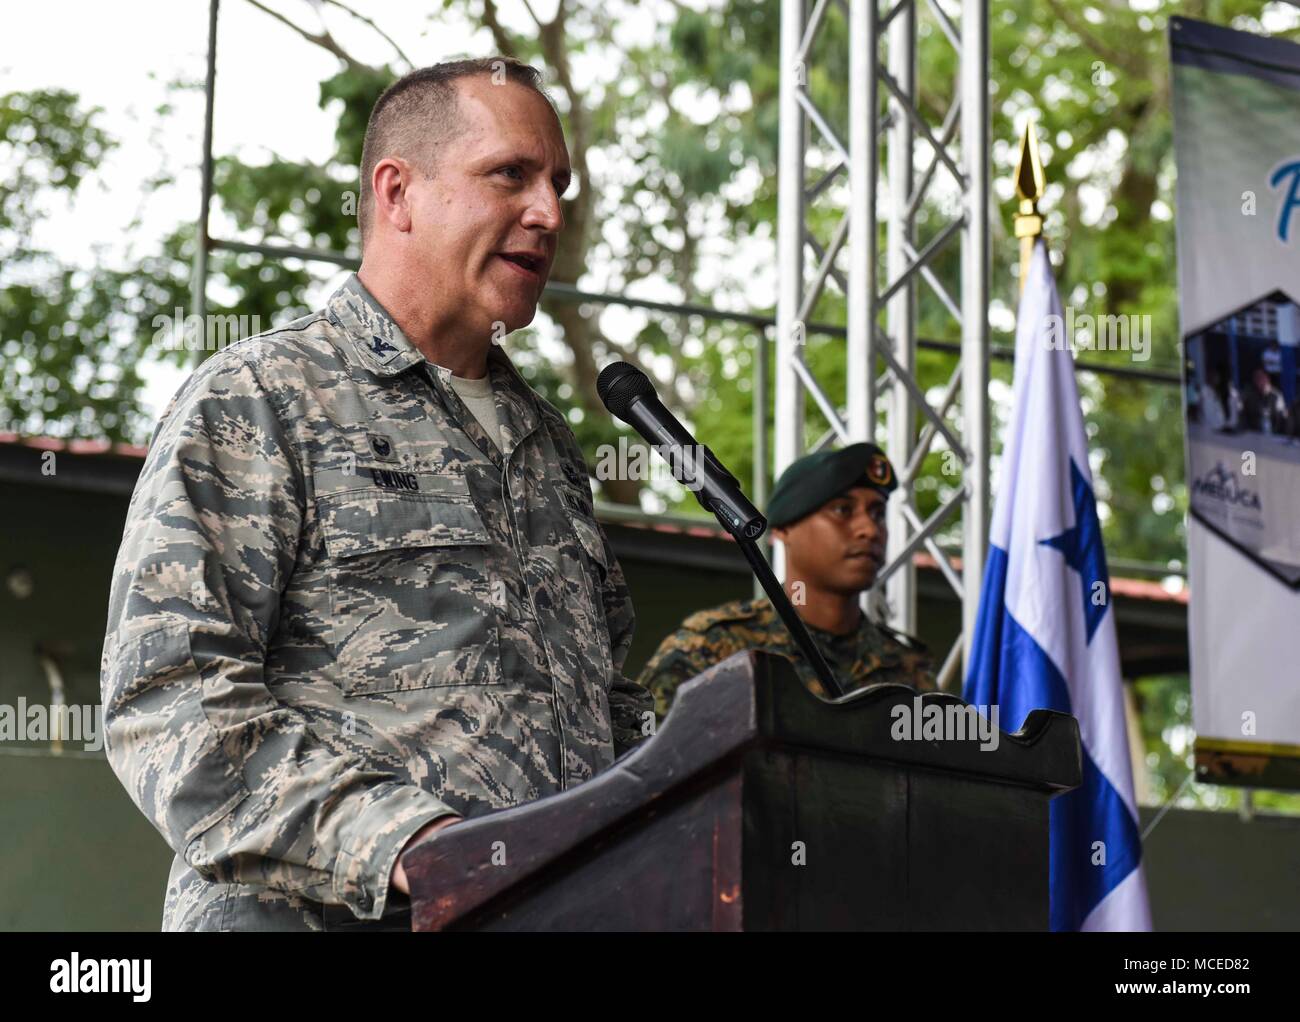 U.S. Air Force Col. Darren Ewing, 346th Air Expeditionary Group commander, speaks to guests at the opening ceremony of Exercise New Horizons 2018, April 11, 2018, in Meteti, Panama. During the exercise, U.S. military members will build three schools, one community center and a women’s health ward in the Meteti area. They will also work closely with Panamanian health providers bringing medical aid to people in the Darien, Coclé, and Veraguas Provinces. (U.S. Air Force photo by Senior Airman Dustin Mullen/Released) Stock Photo